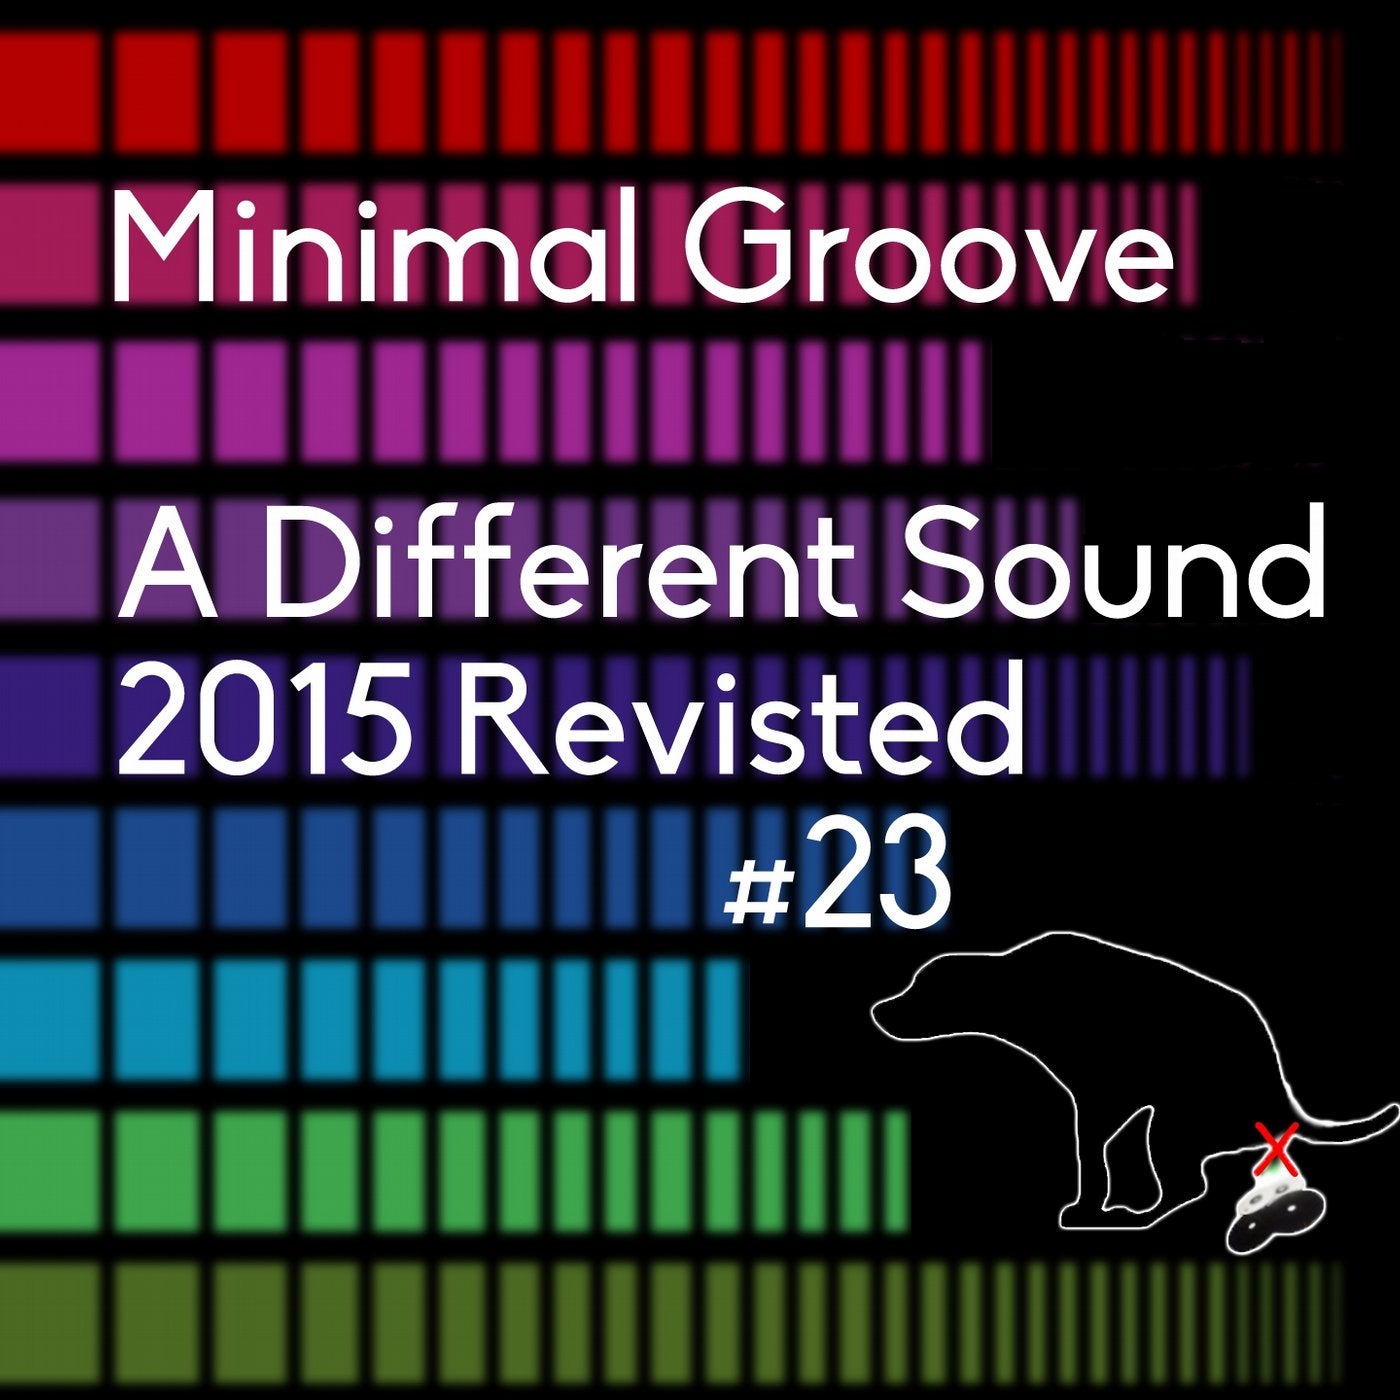 A Different Sound (2015 Revisited)